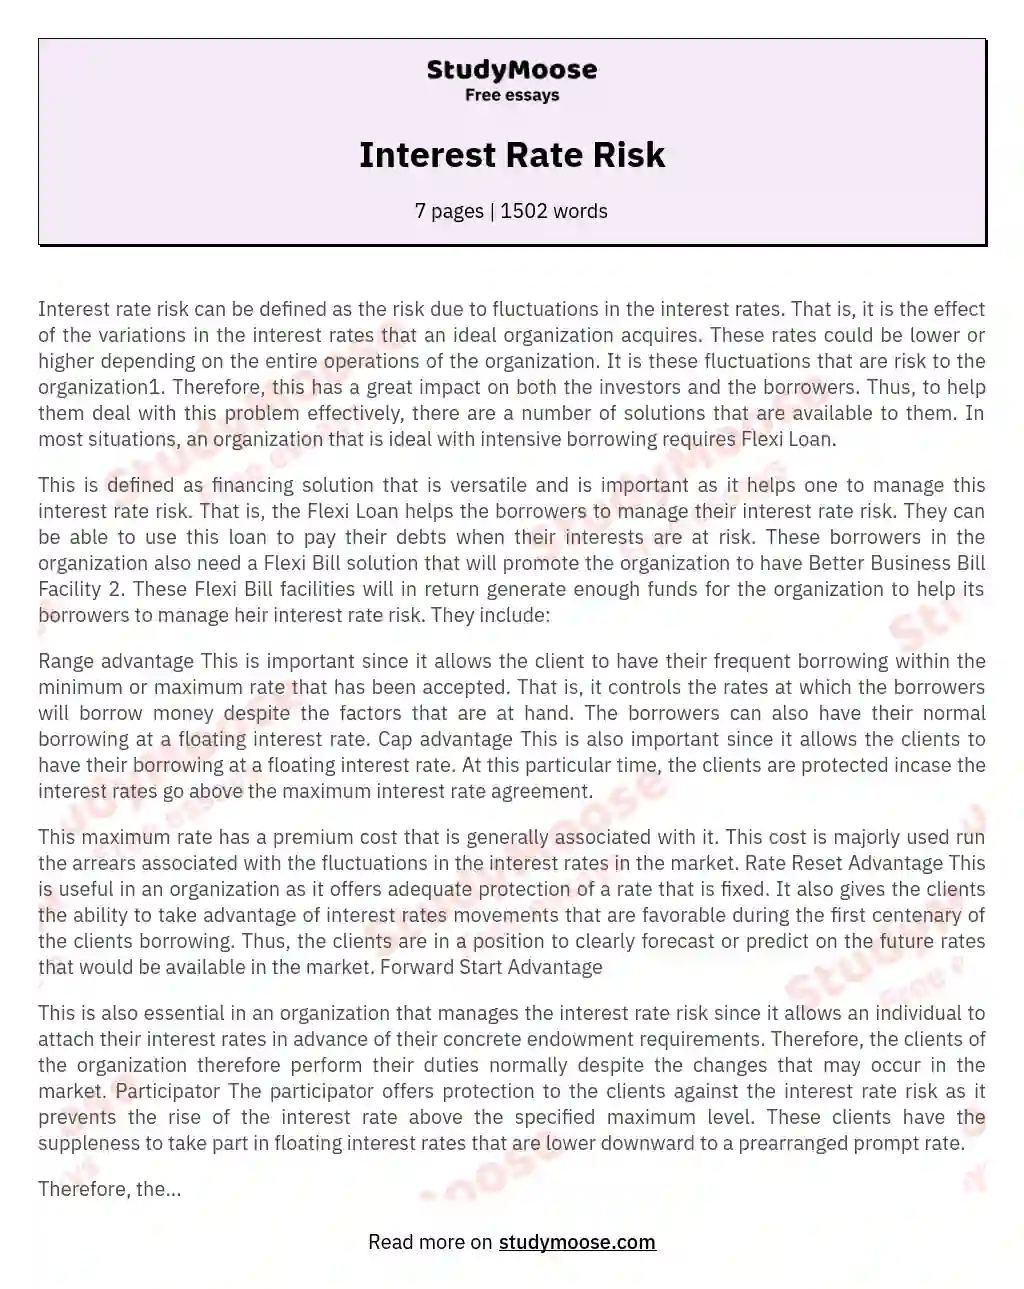 Interest Rate Risk essay